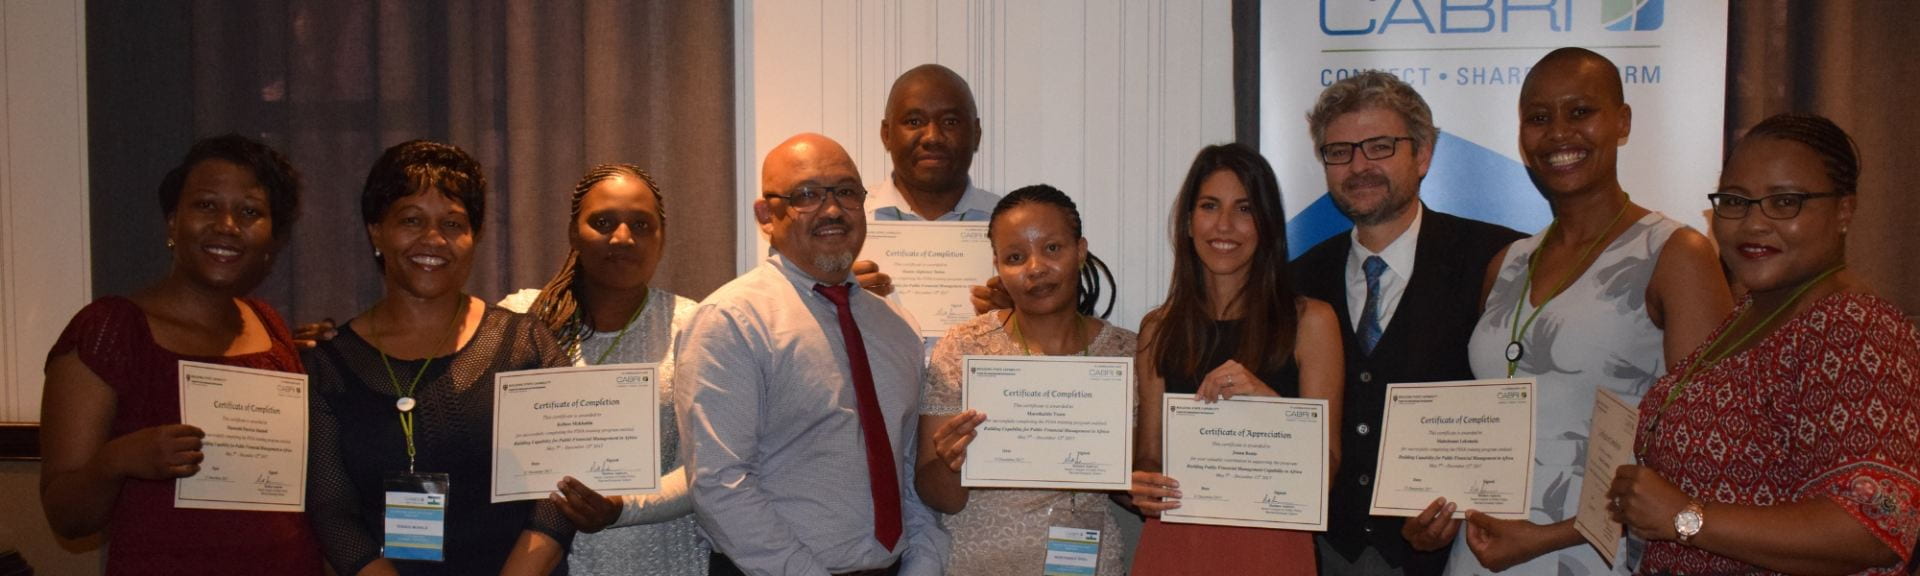 Matt Andrews with CABRI participants showing their Harvard certificates